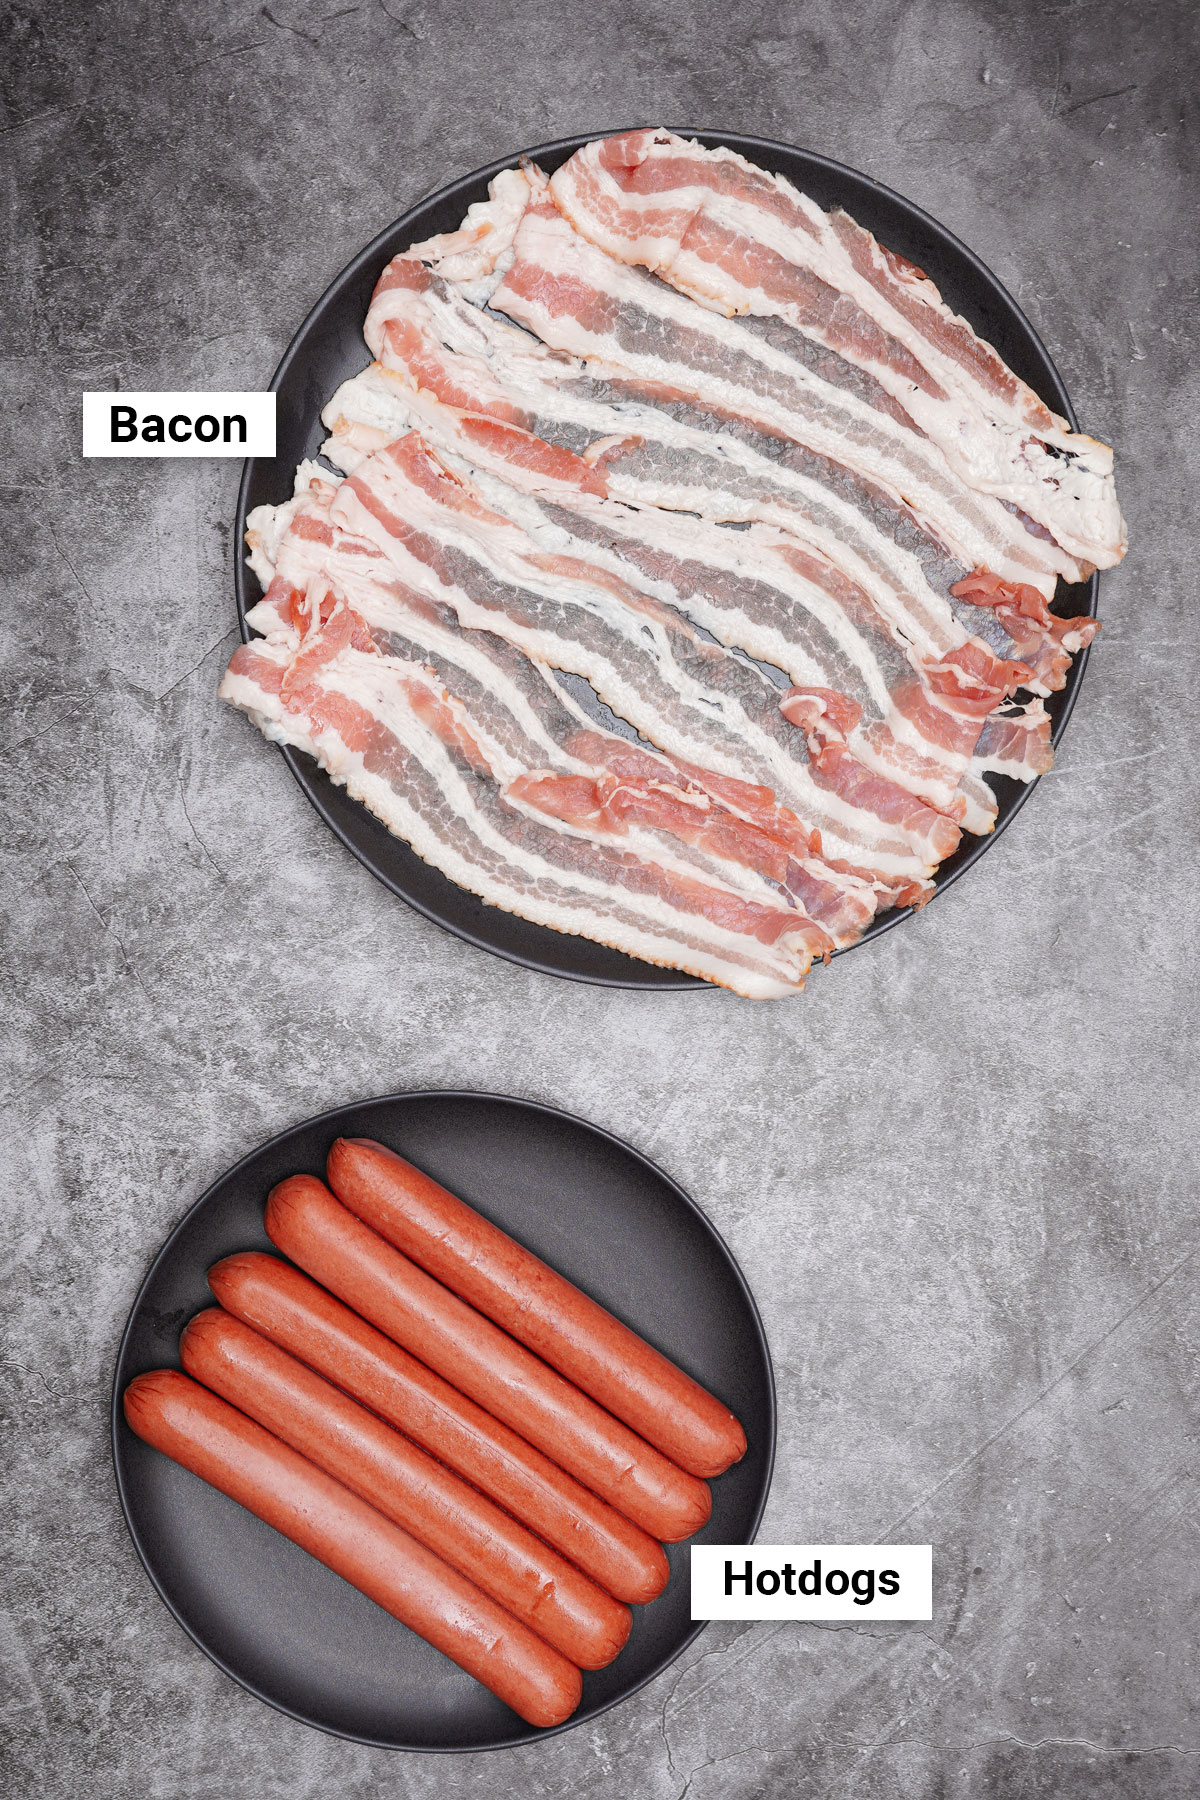 Ingredients for bacon-wrapped hot dogs